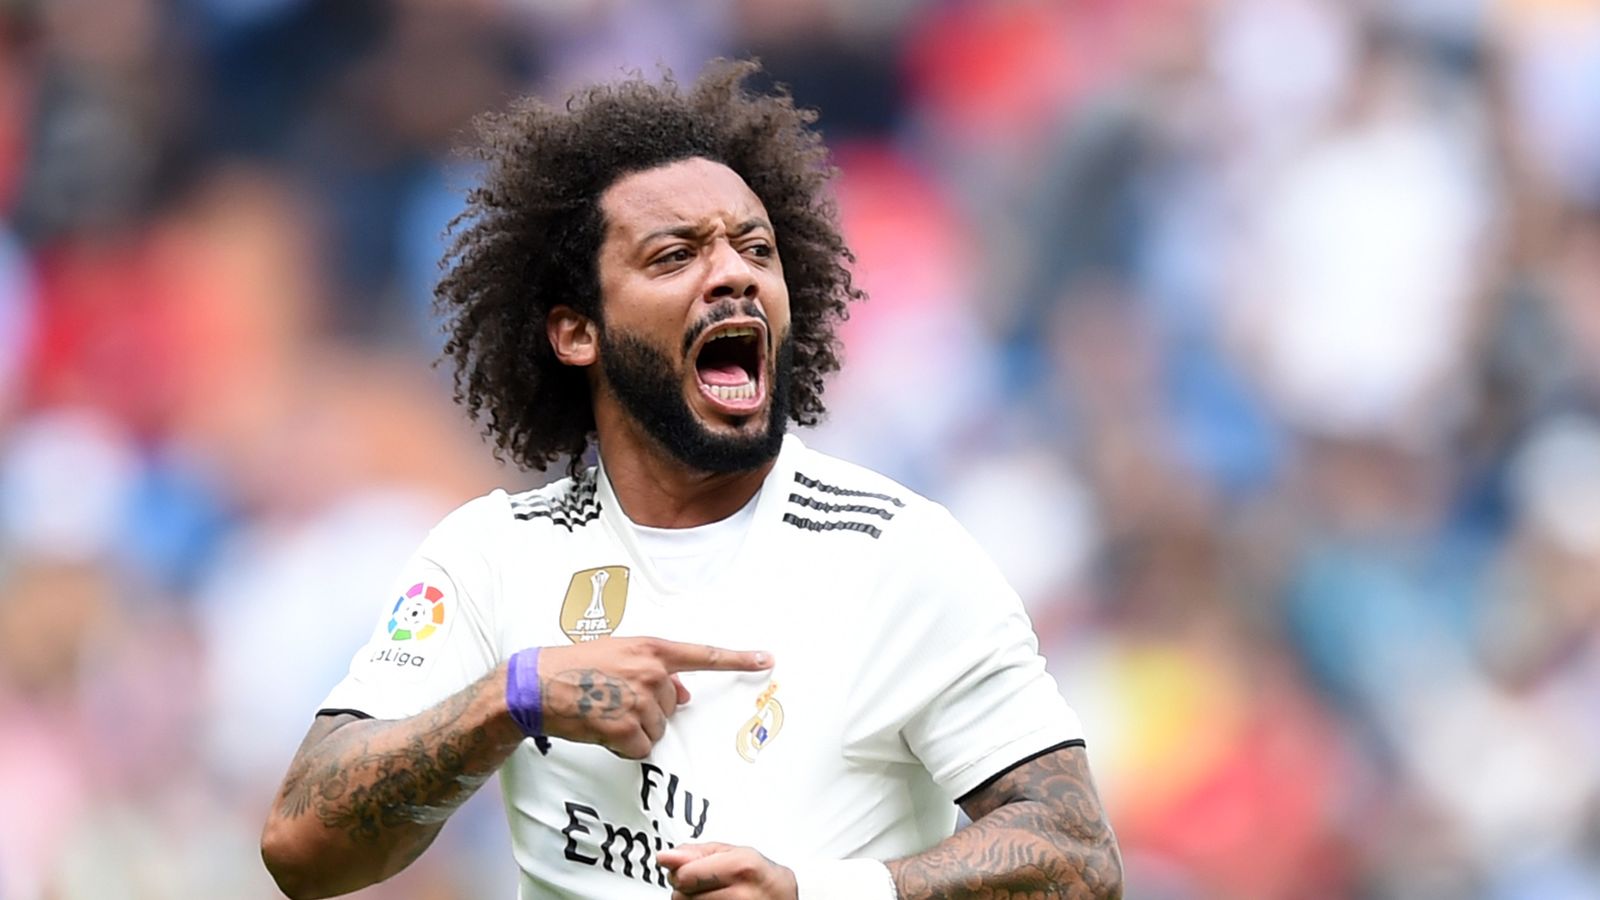 Marcelo is leaving as most decorated player in Real Madrid's history after UCL win